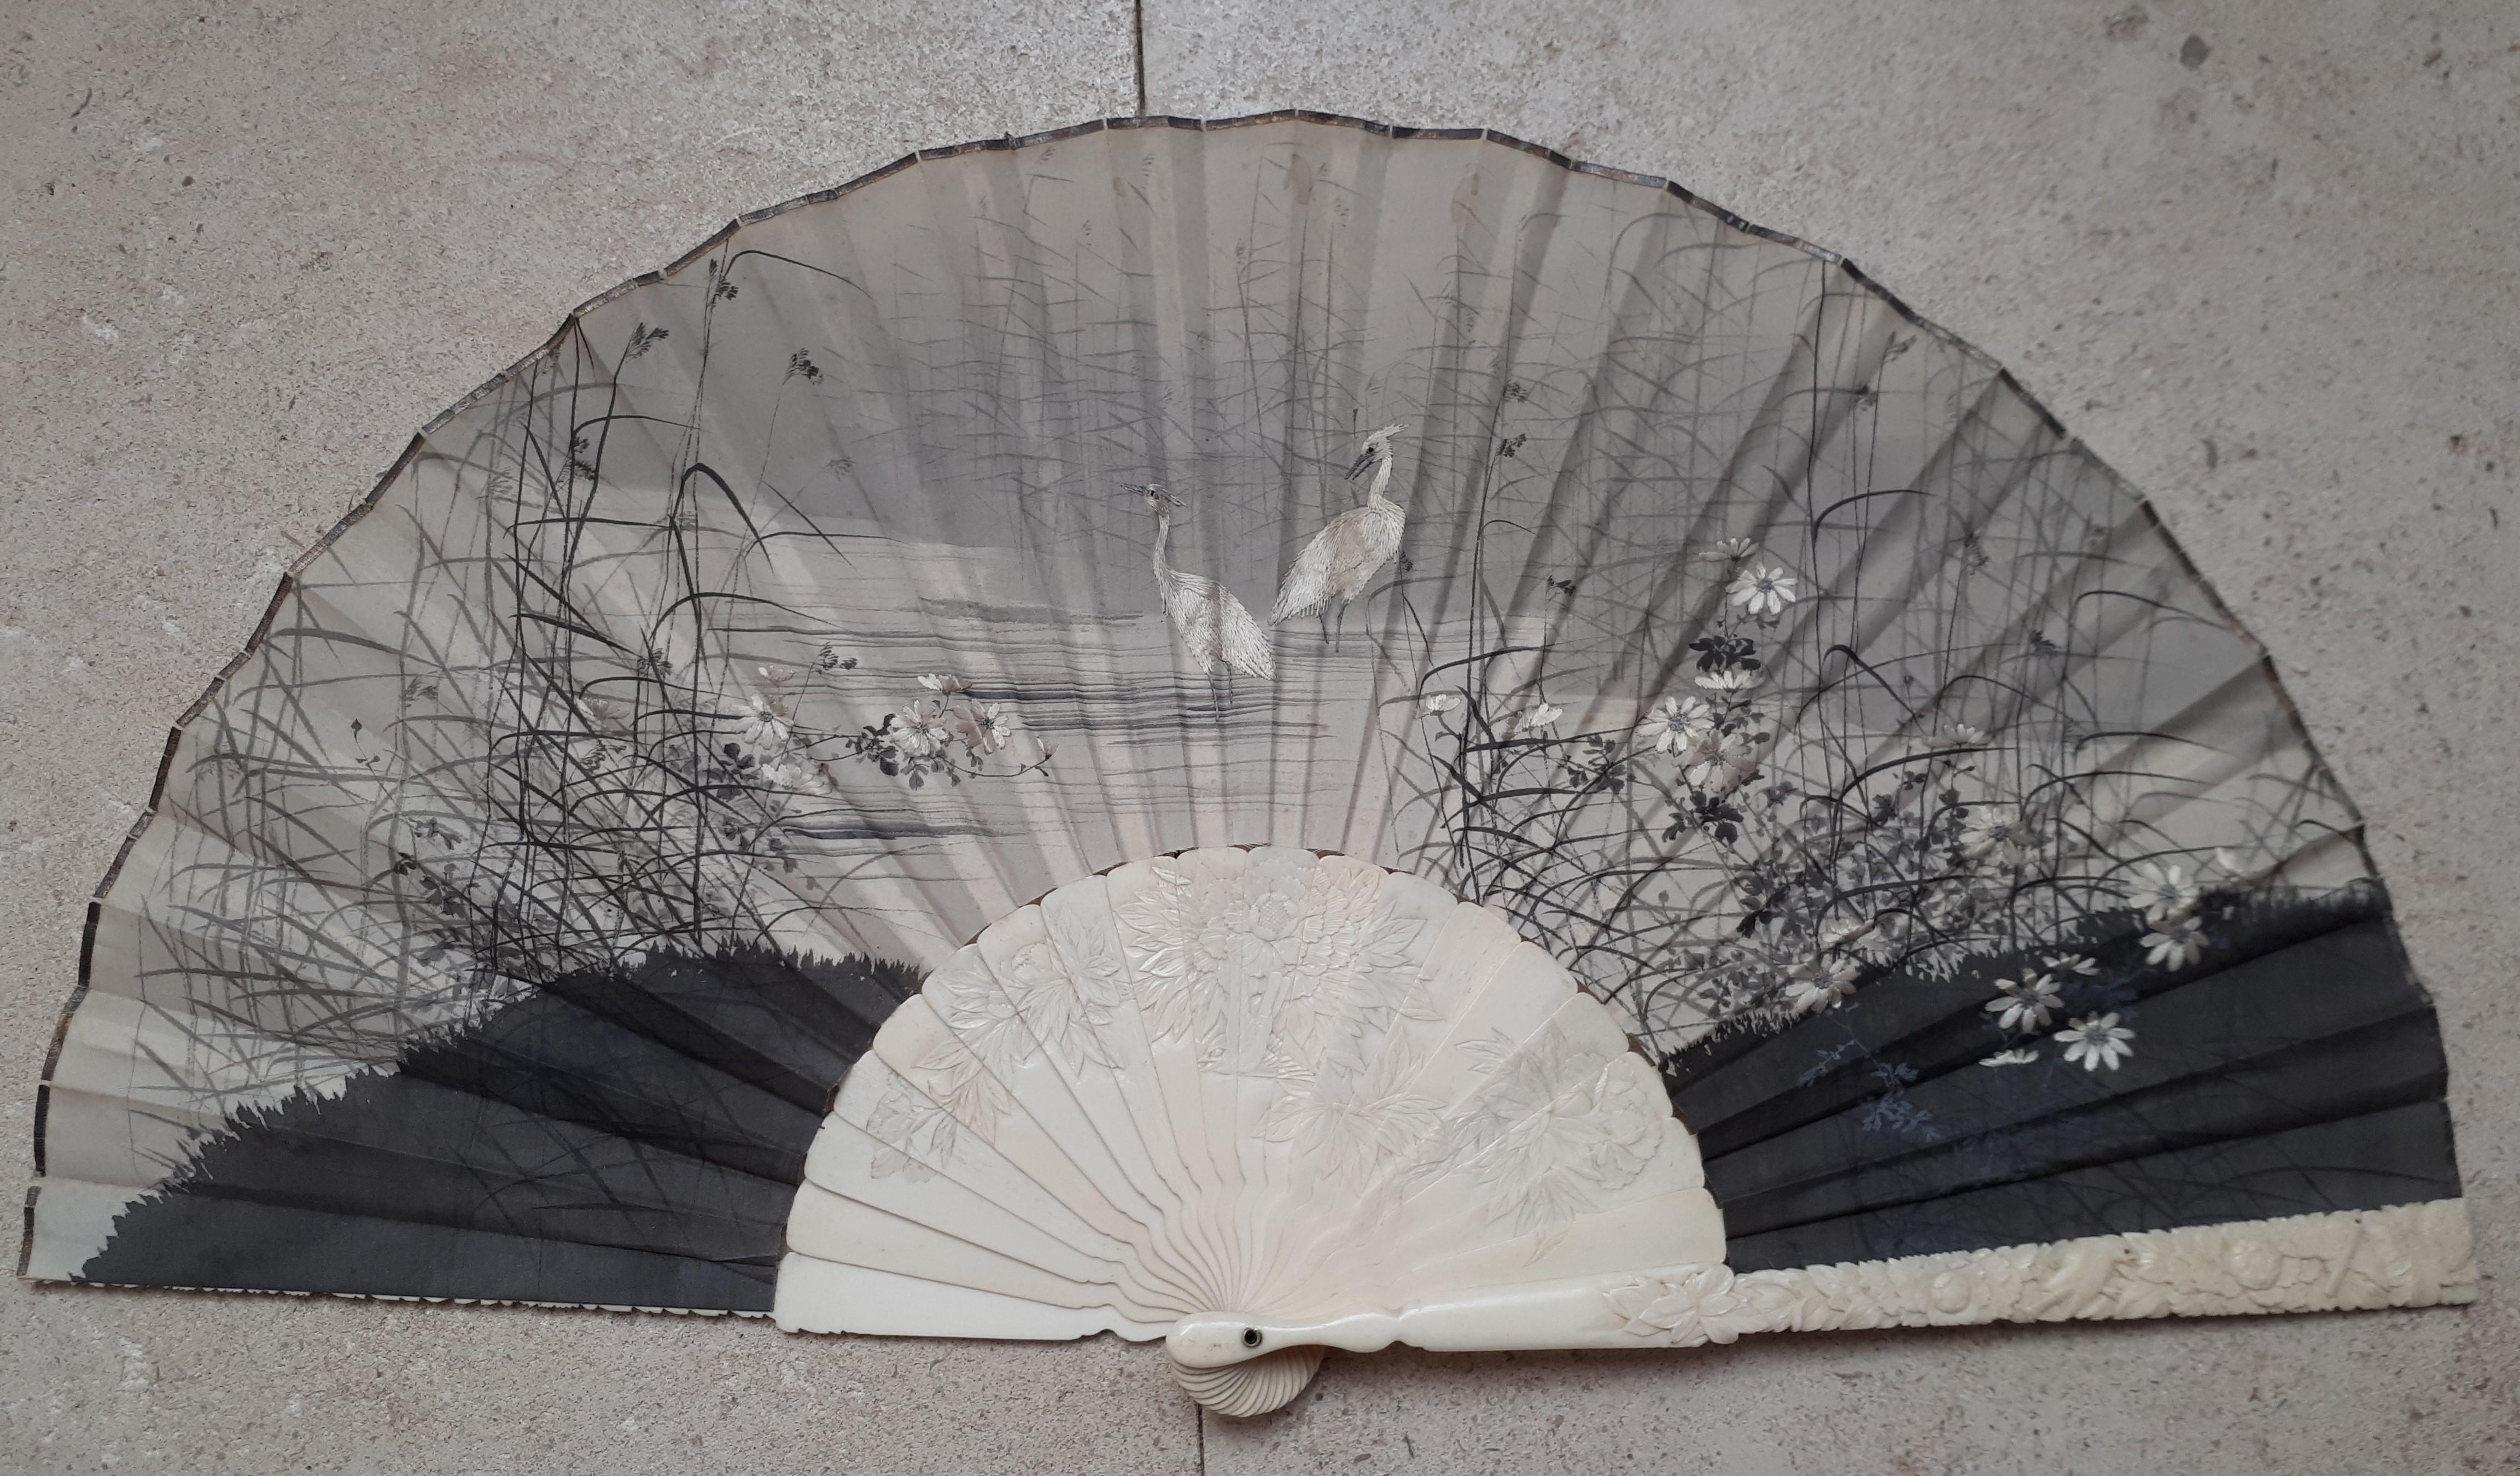 Precious silk fan painted with ink and embroidered, decorated with cranes in a lake landscape. The strands are in finely carved bone decorated with peonies.
Gold signature on the reverse.
Japan, late 19th century.